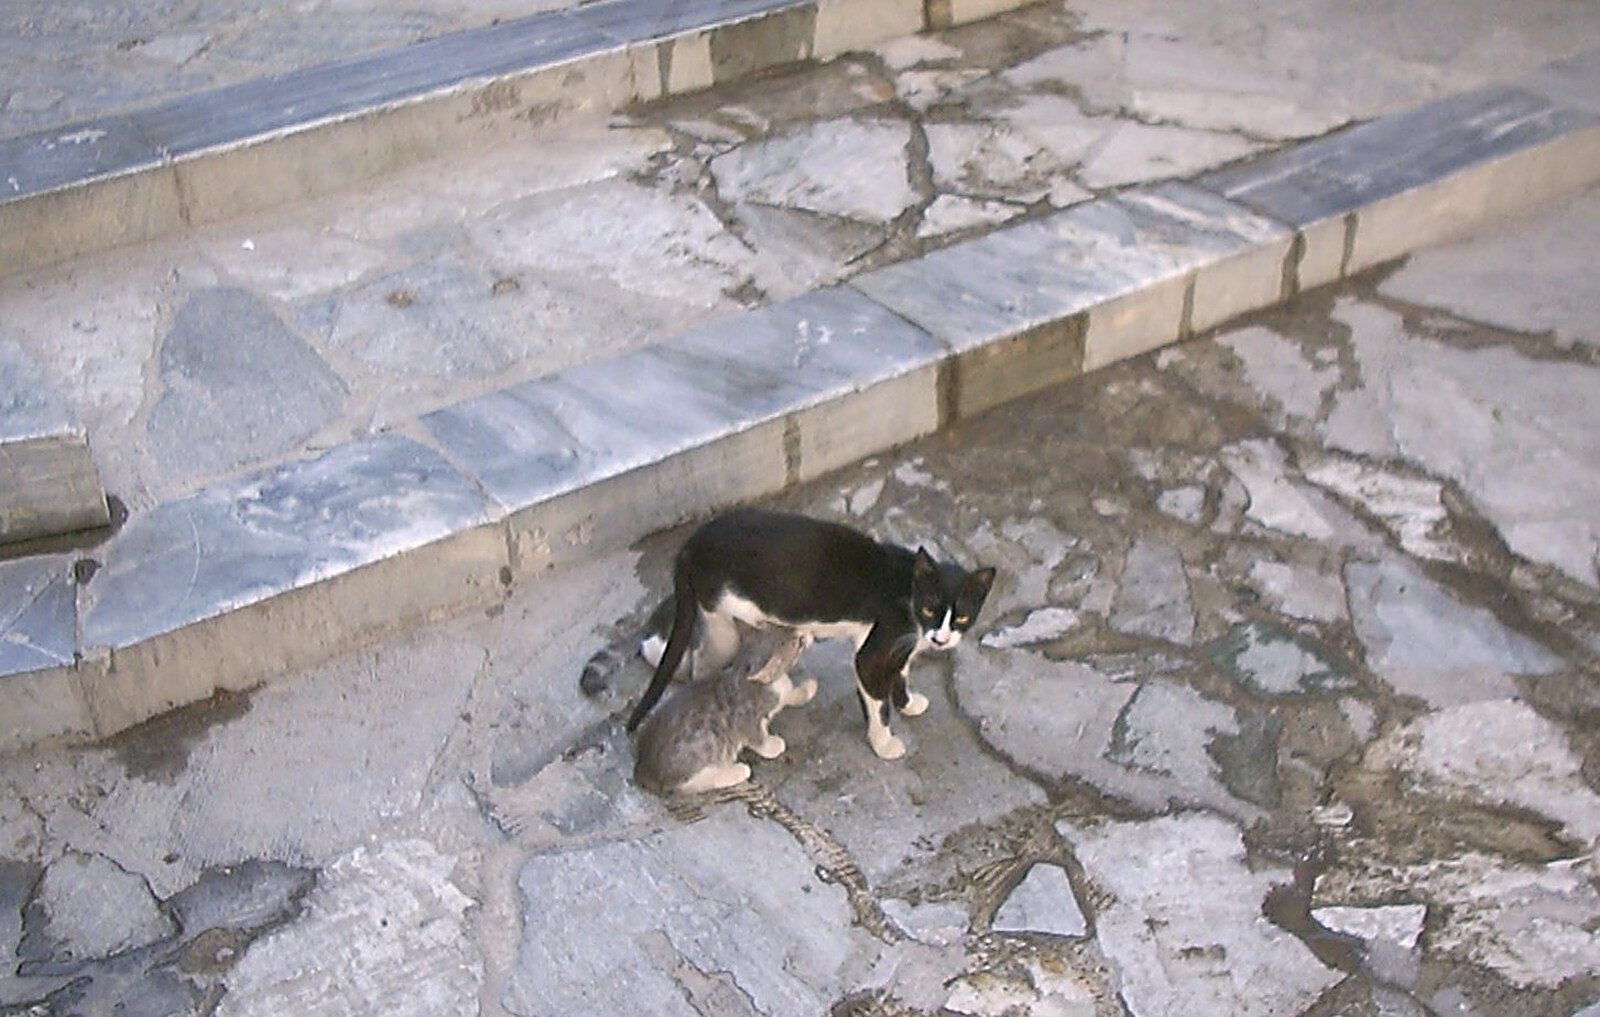 A Postcard From Athens: A Day Trip to the Olympics, Greece - 19th August 2004: A feral cat feeds its kitten